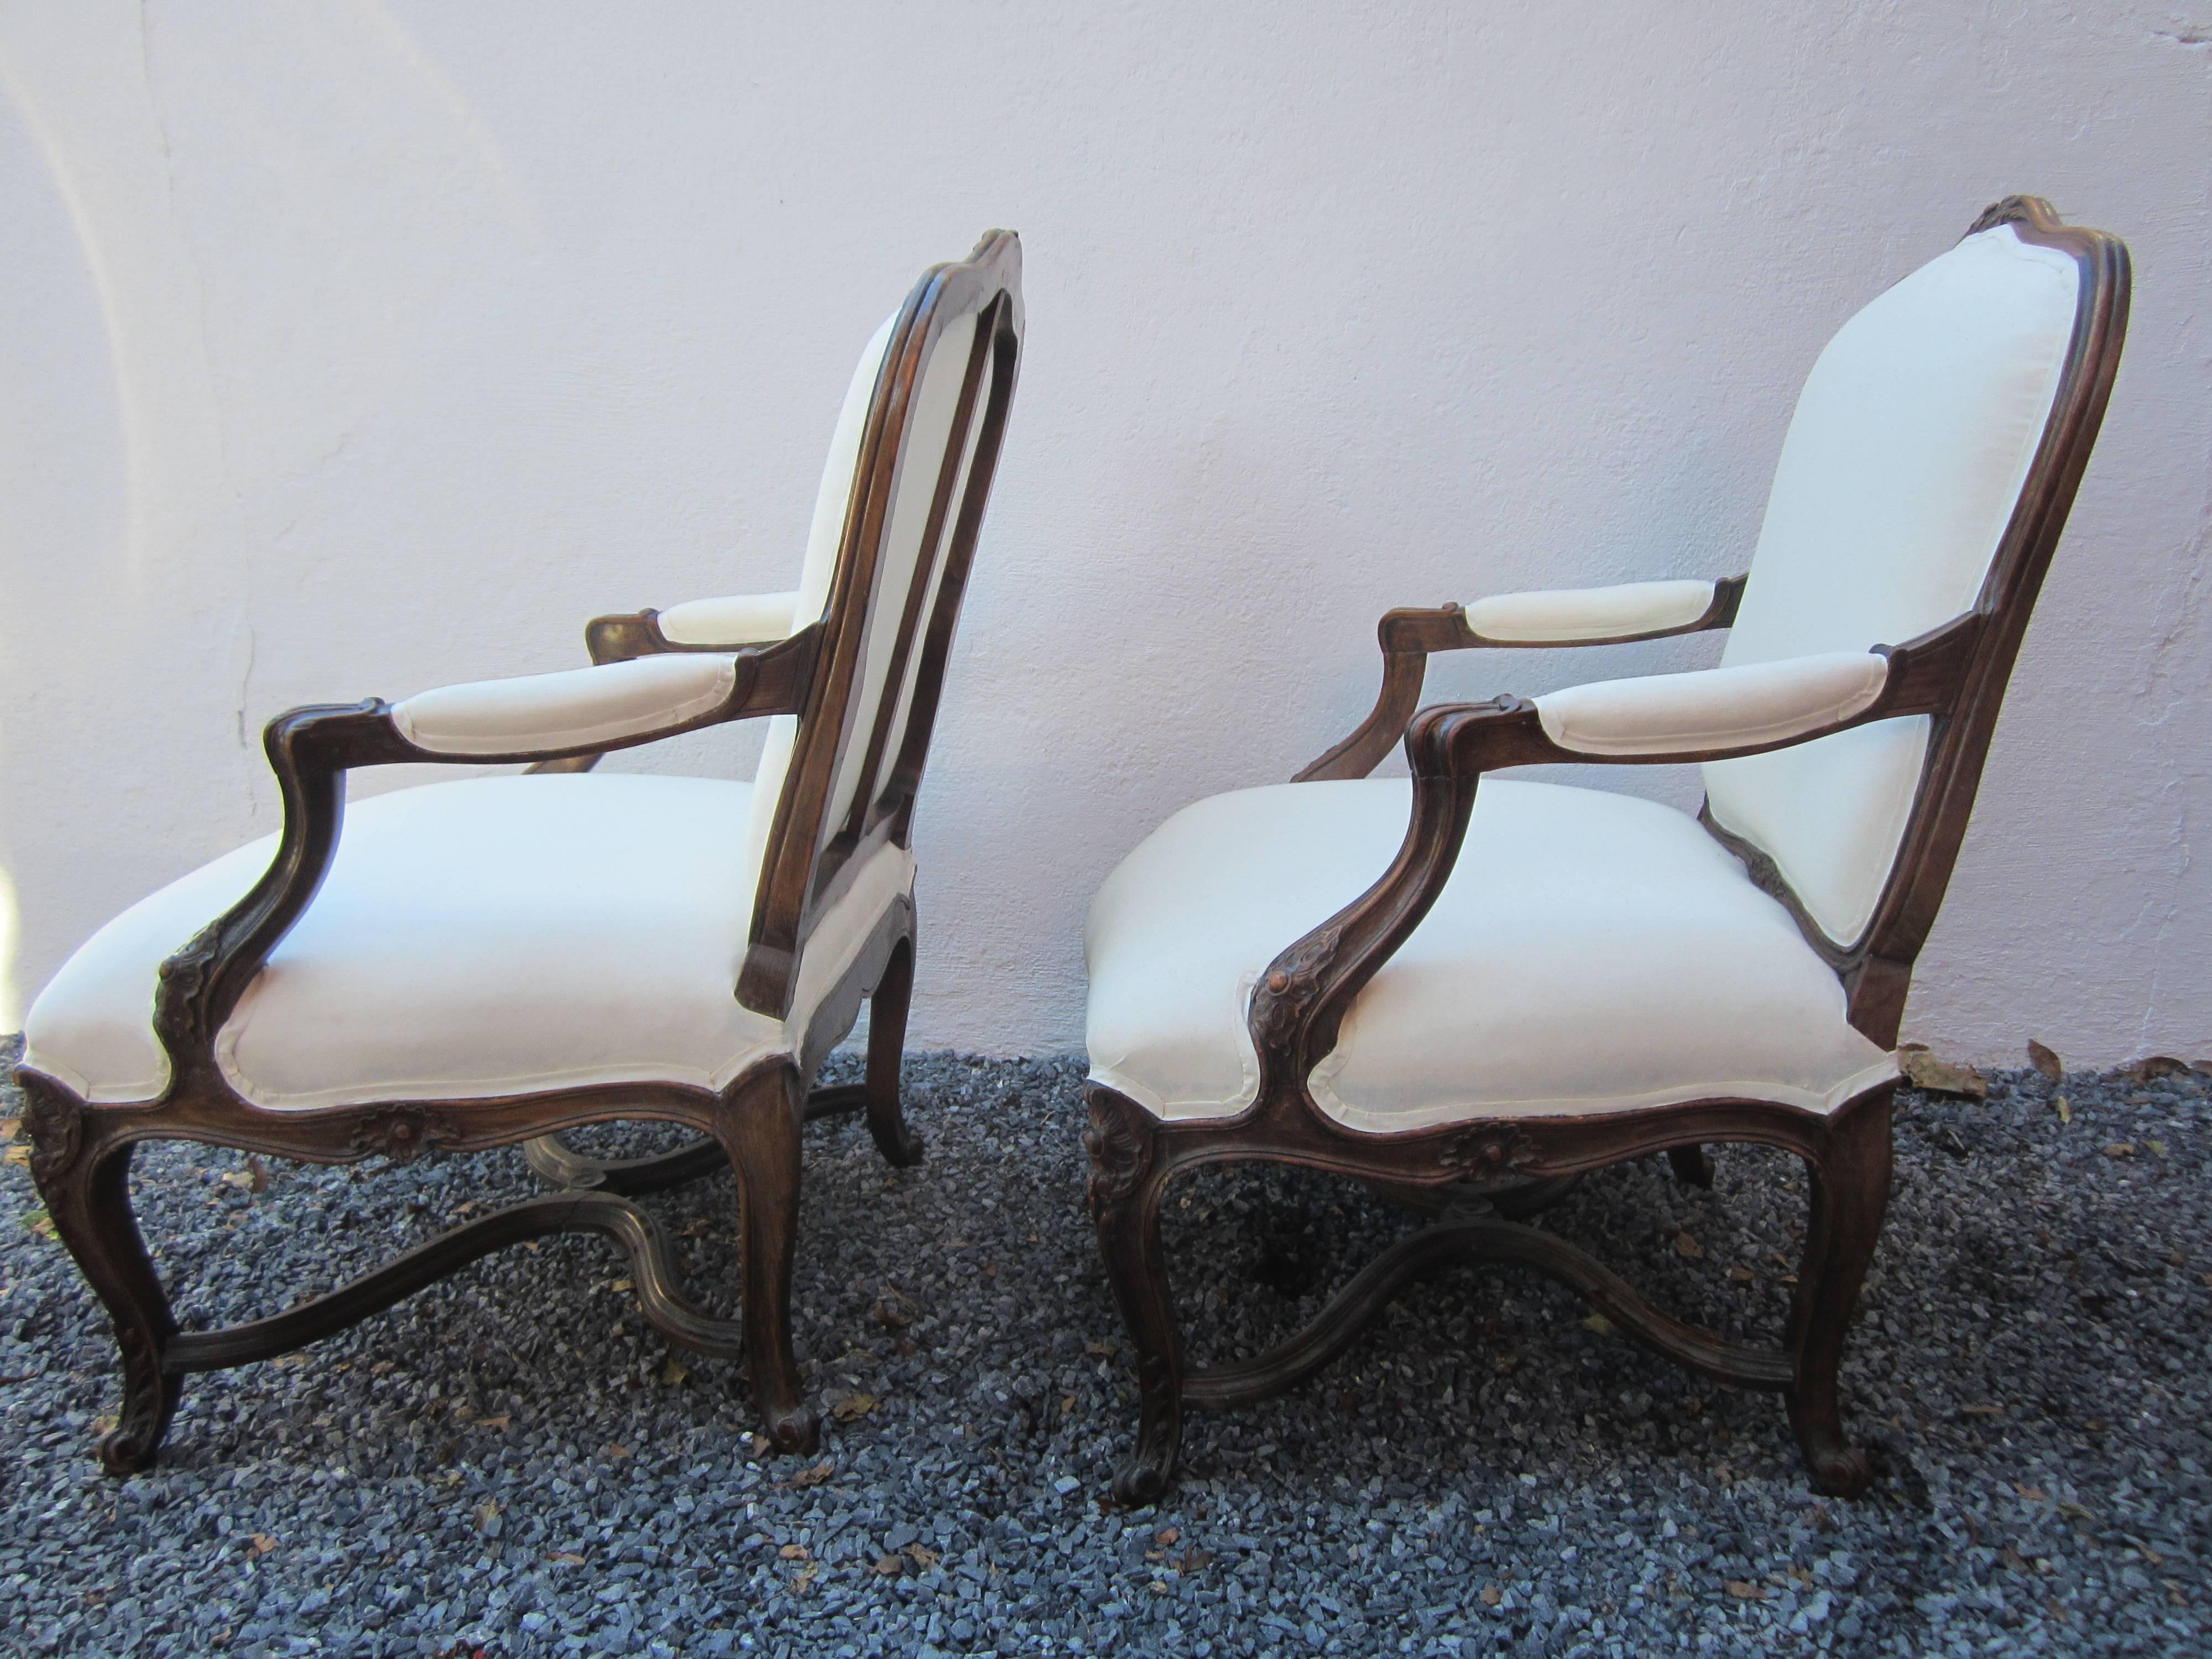 Large modern scale pair of Louis XVI style fauteuils completely refurbished upholstery in muslin from the 19th century walnut frames.